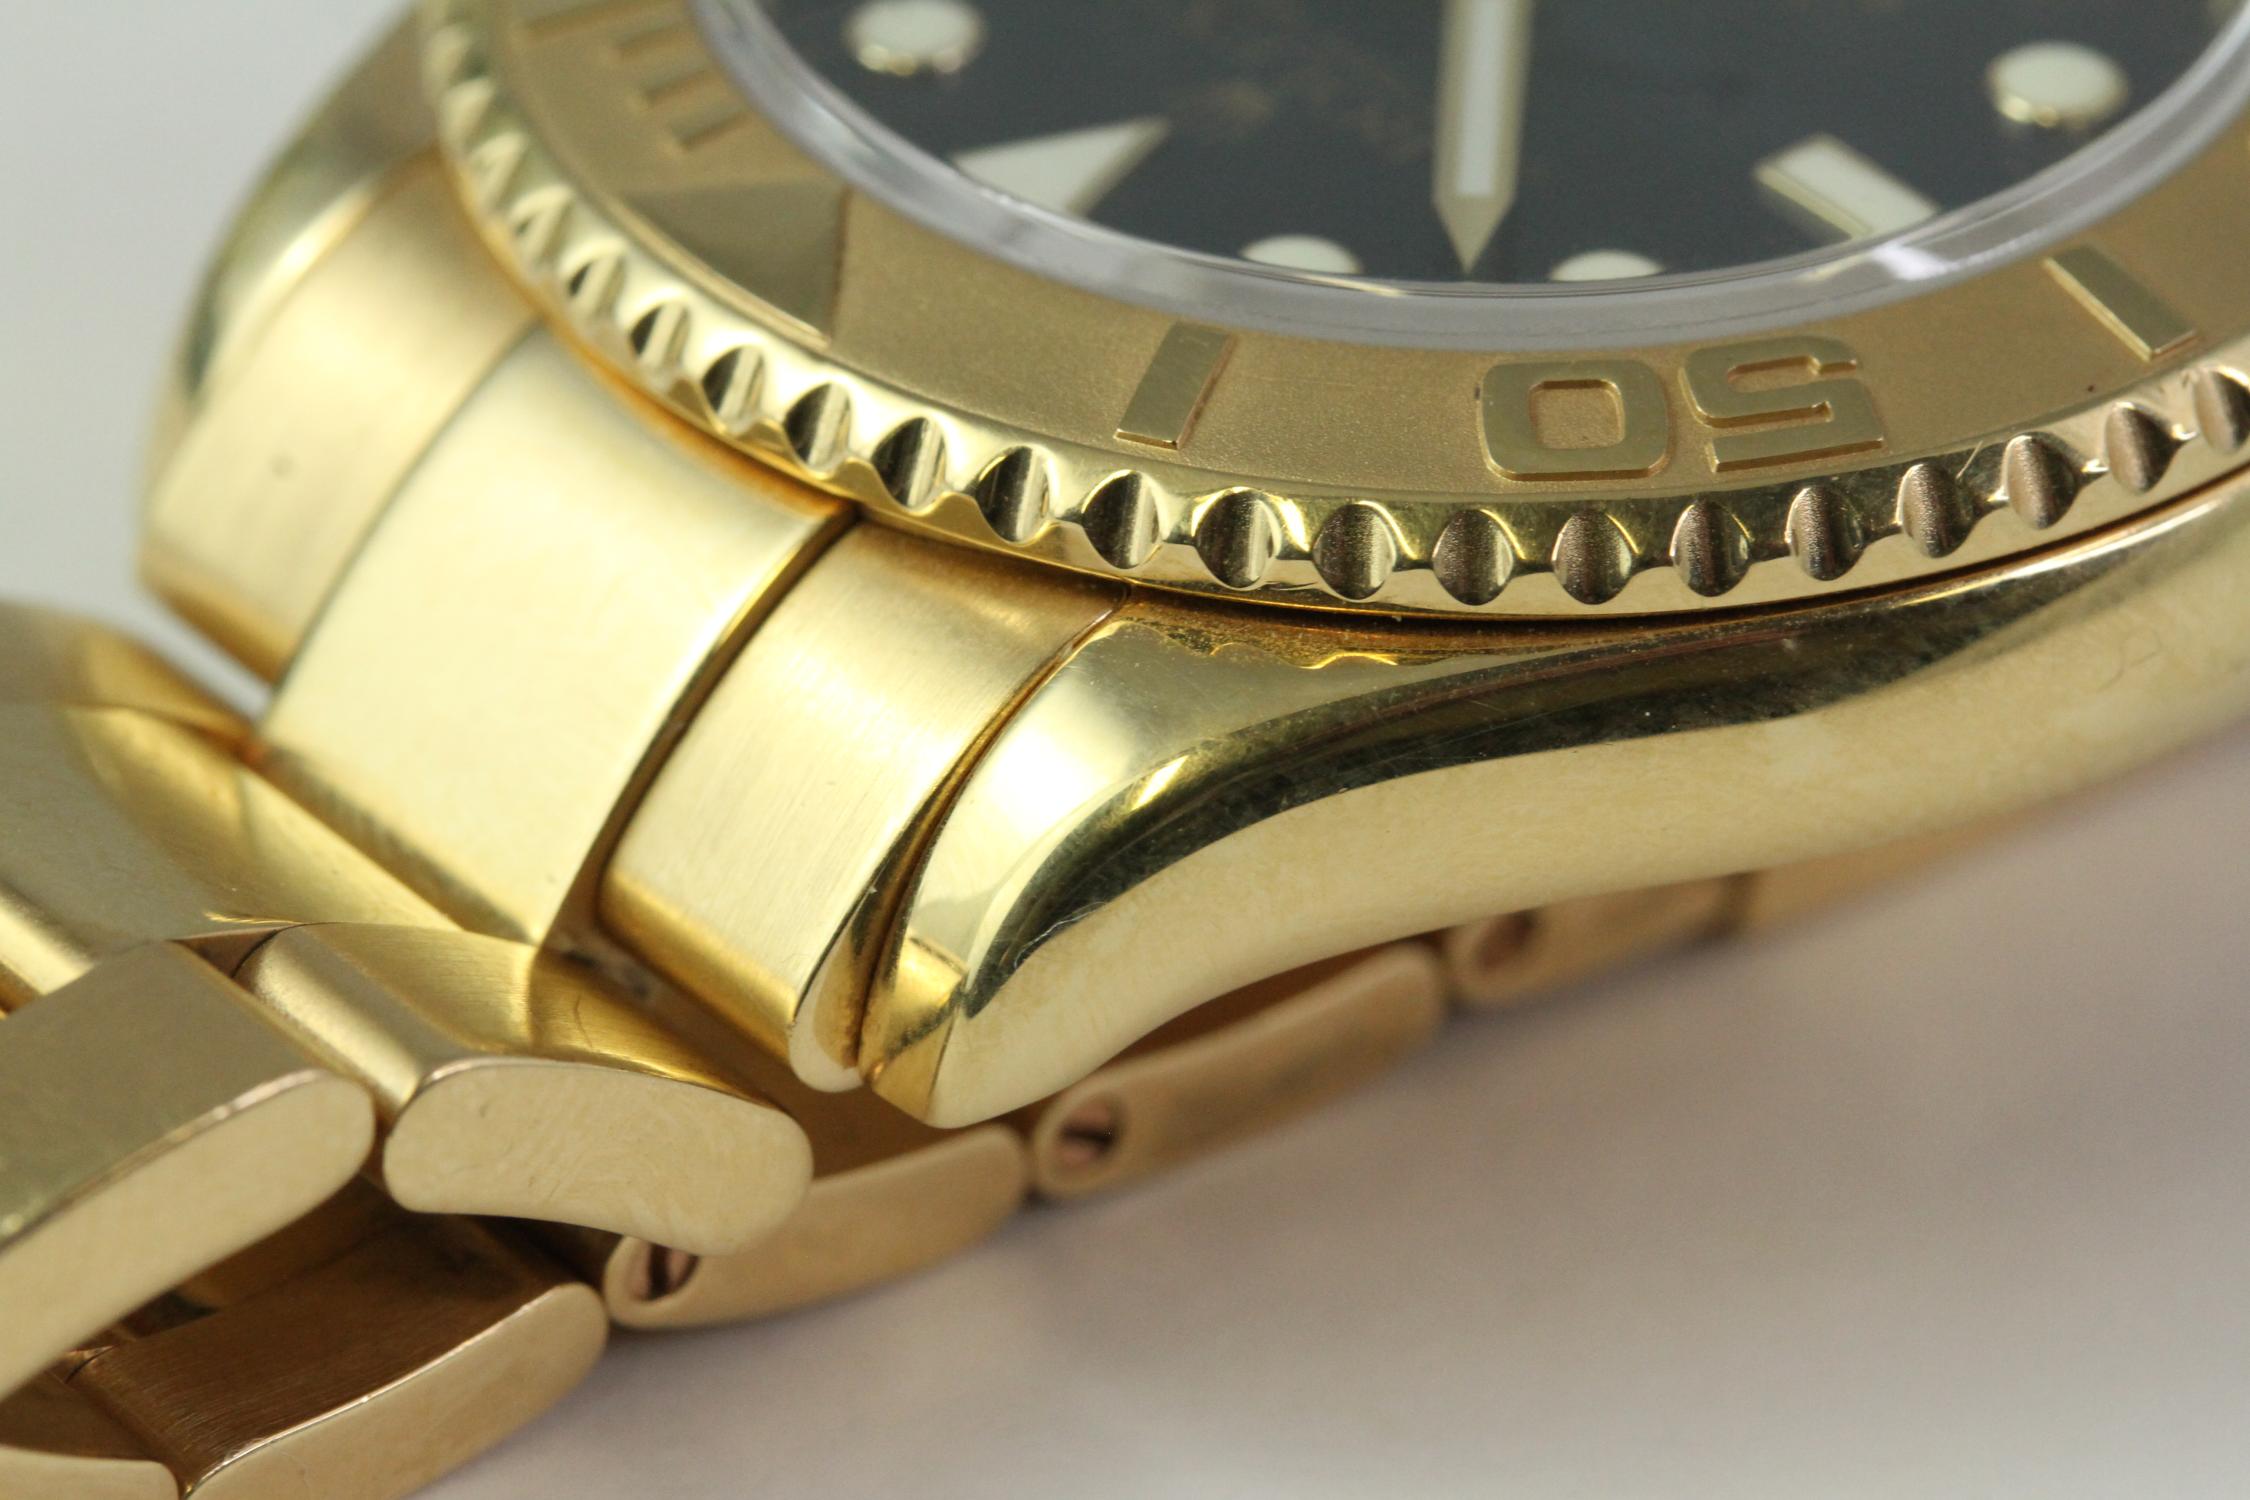 18CT GOLD ROLEX YACHT-MASTER 16628 WITH BOX AND PAPERS 2008 - Image 11 of 12